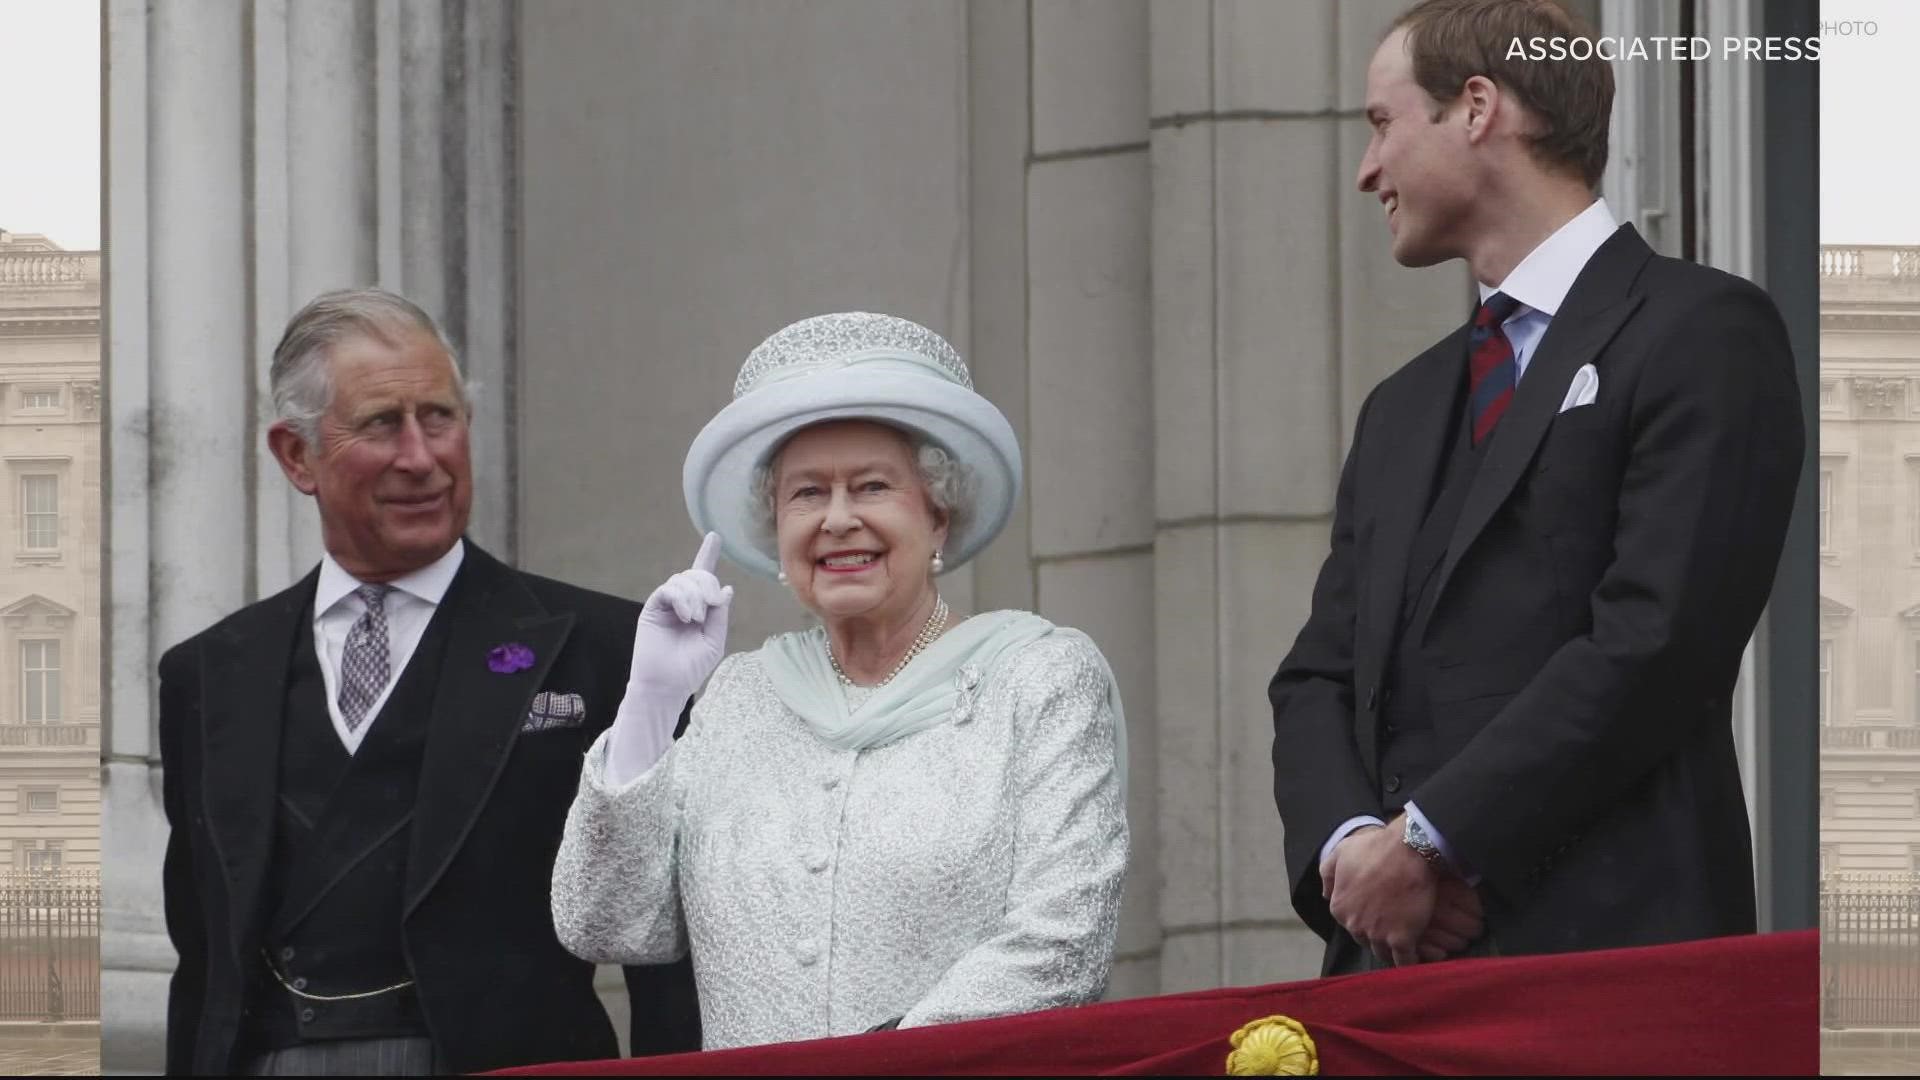 We answer your questions about what happens following Queen Elizabeth II's death